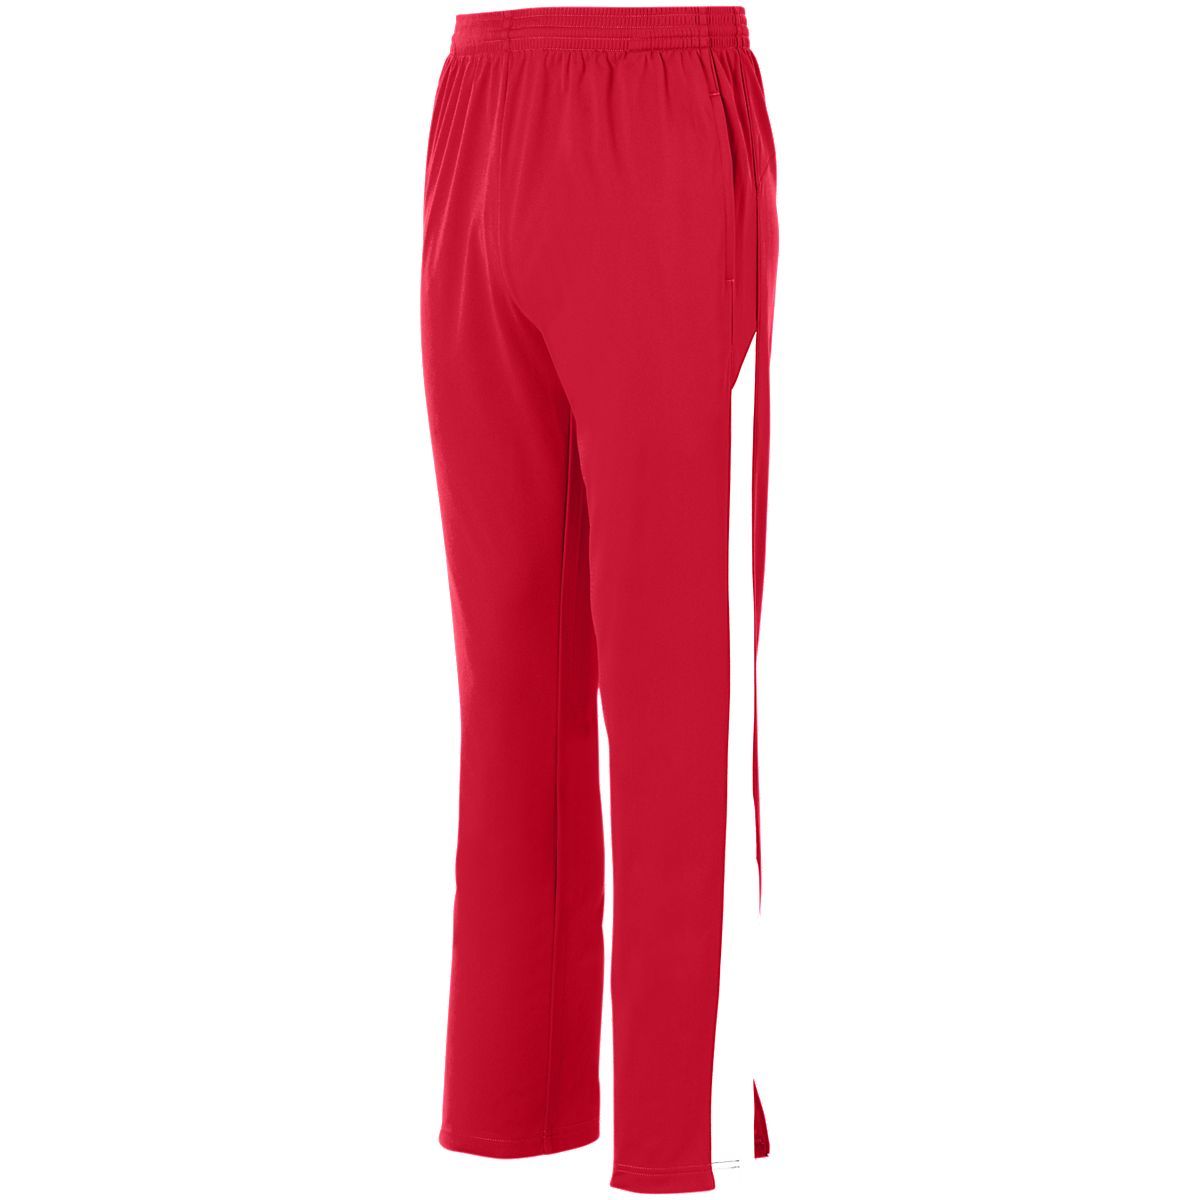 Augusta Sportswear Medalist Pant 2.0 in Red/White  -Part of the Adult, Adult-Pants, Pants, Augusta-Products product lines at KanaleyCreations.com